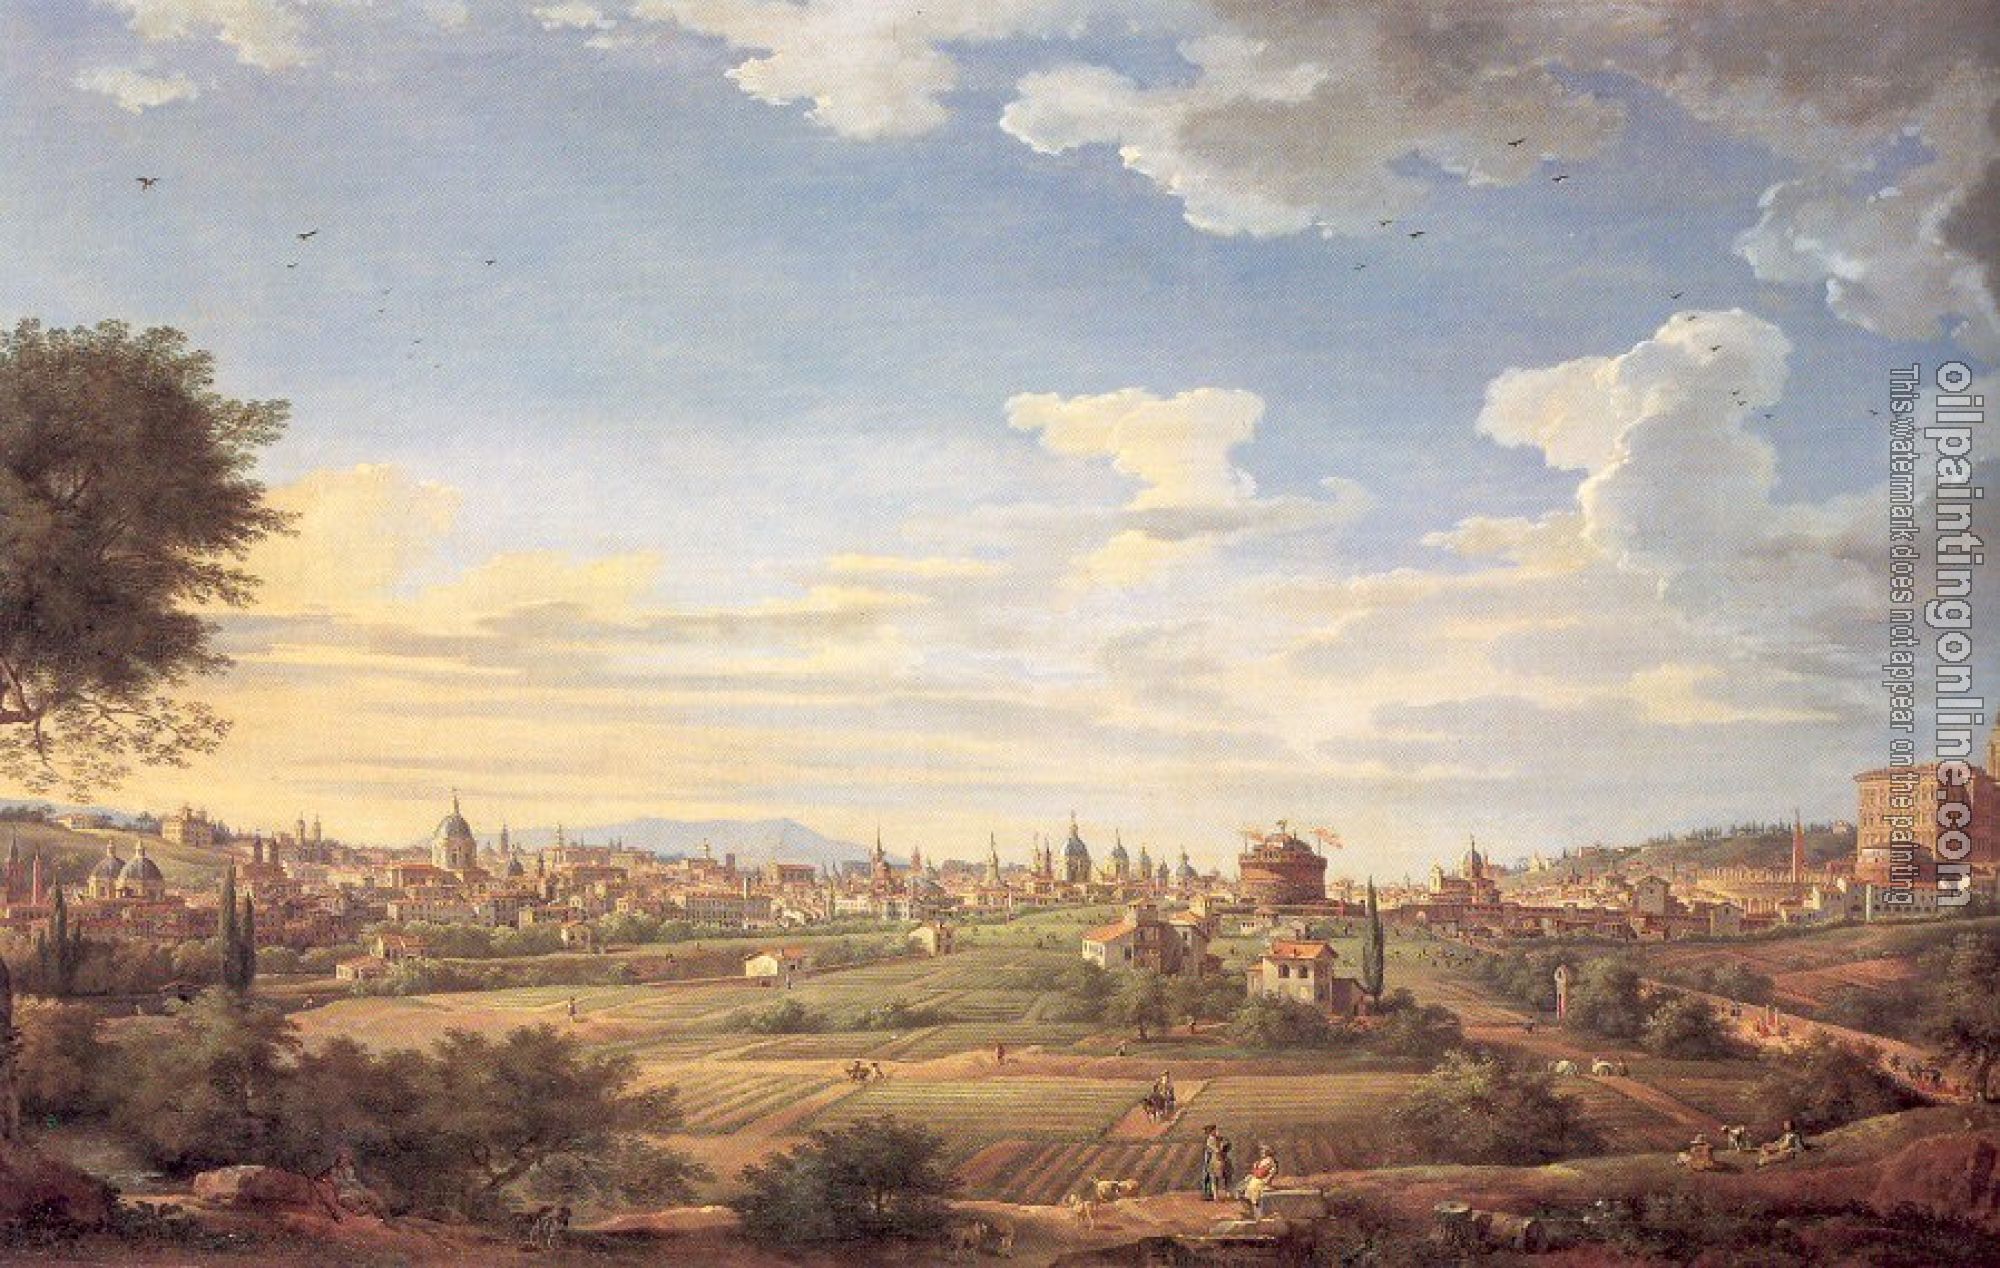 Panini, Giovanni Paolo - View of Rome from Mt. Mario, In the Southeast